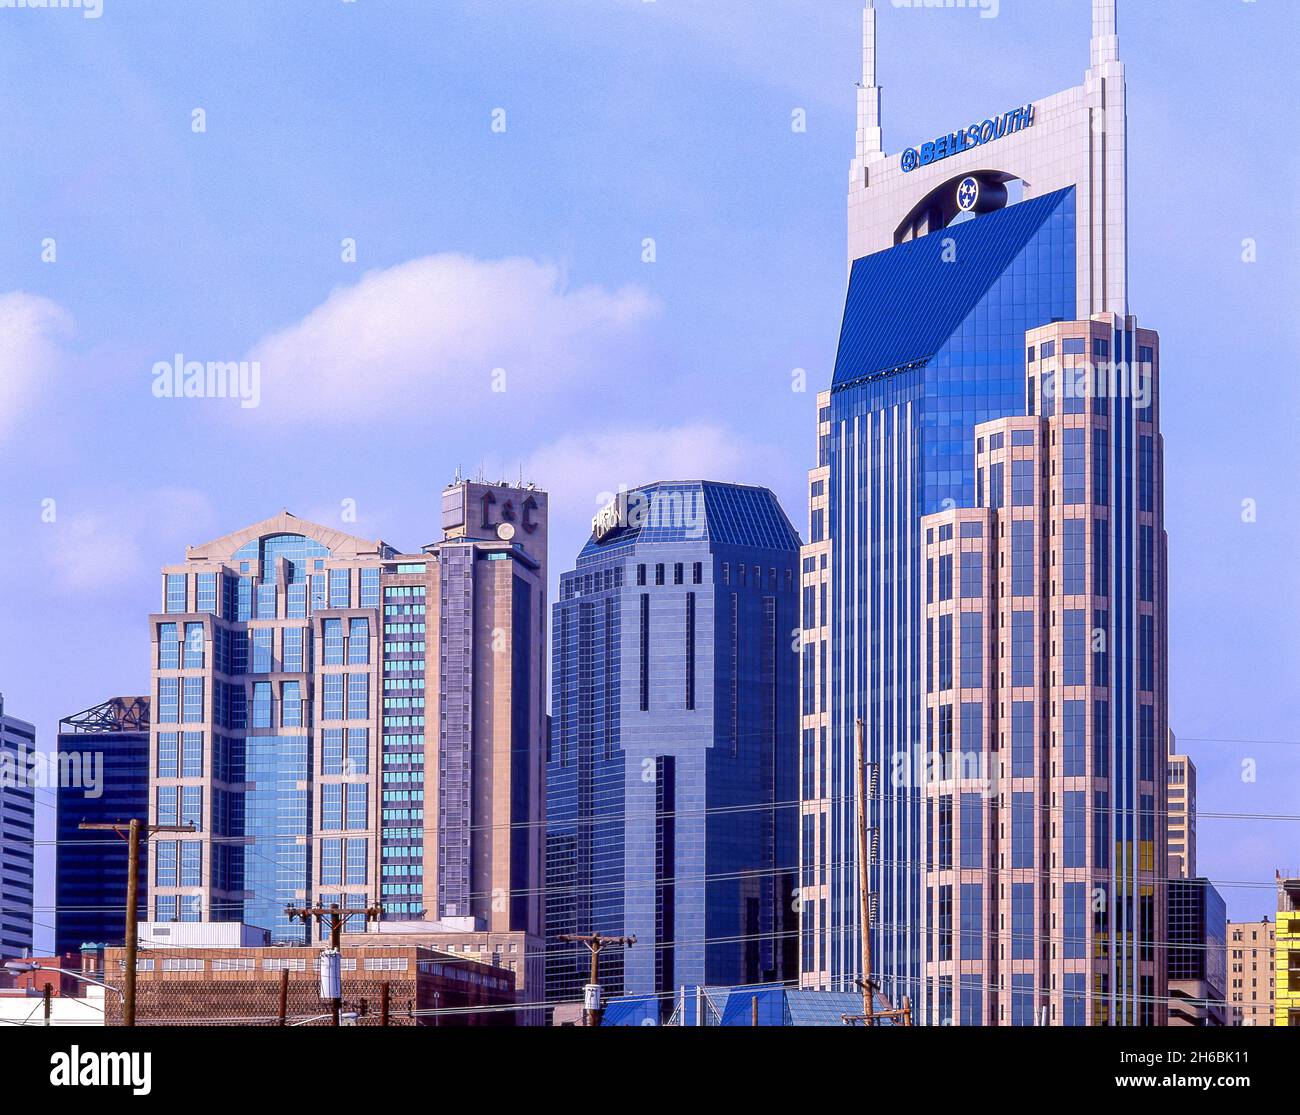 Downtown skyscrapers, Nashville, Tennessee, United States of America Stock Photo